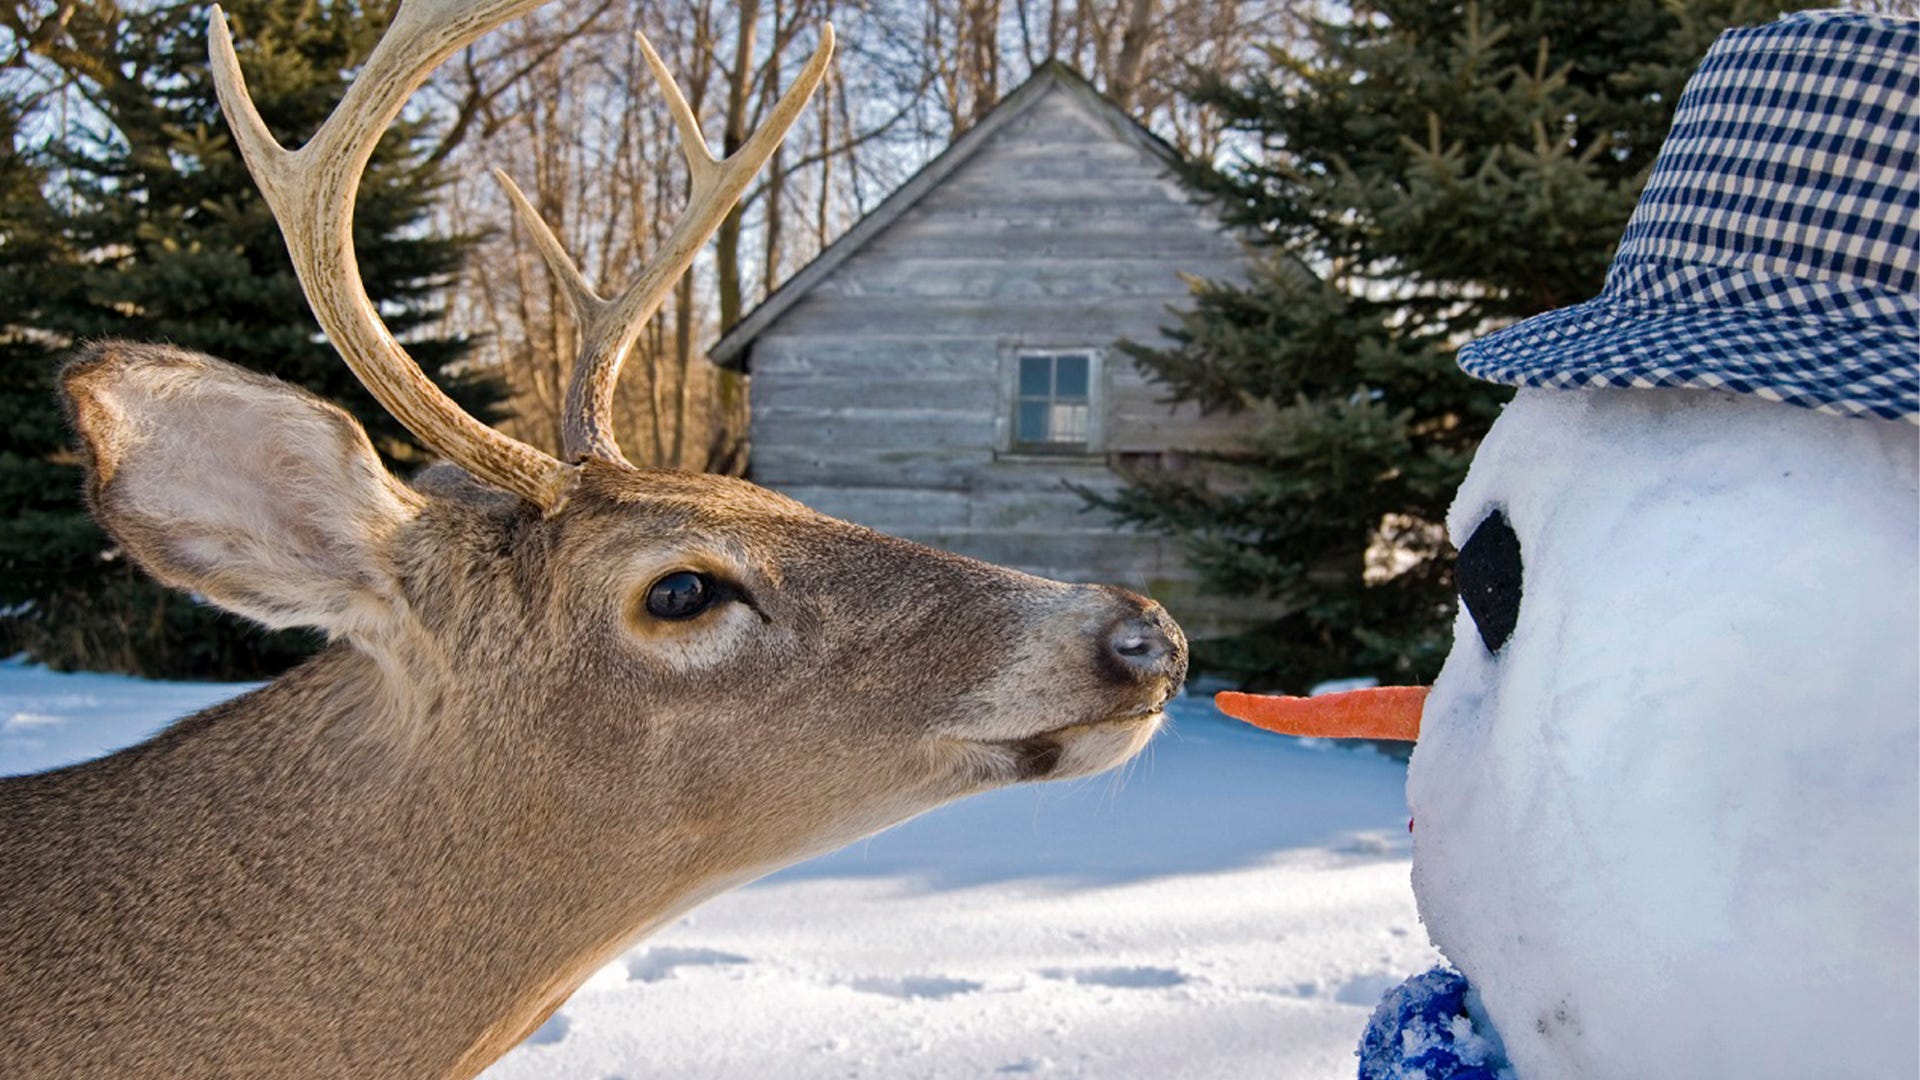 17 Solutions to Keep Deer Off Your Property